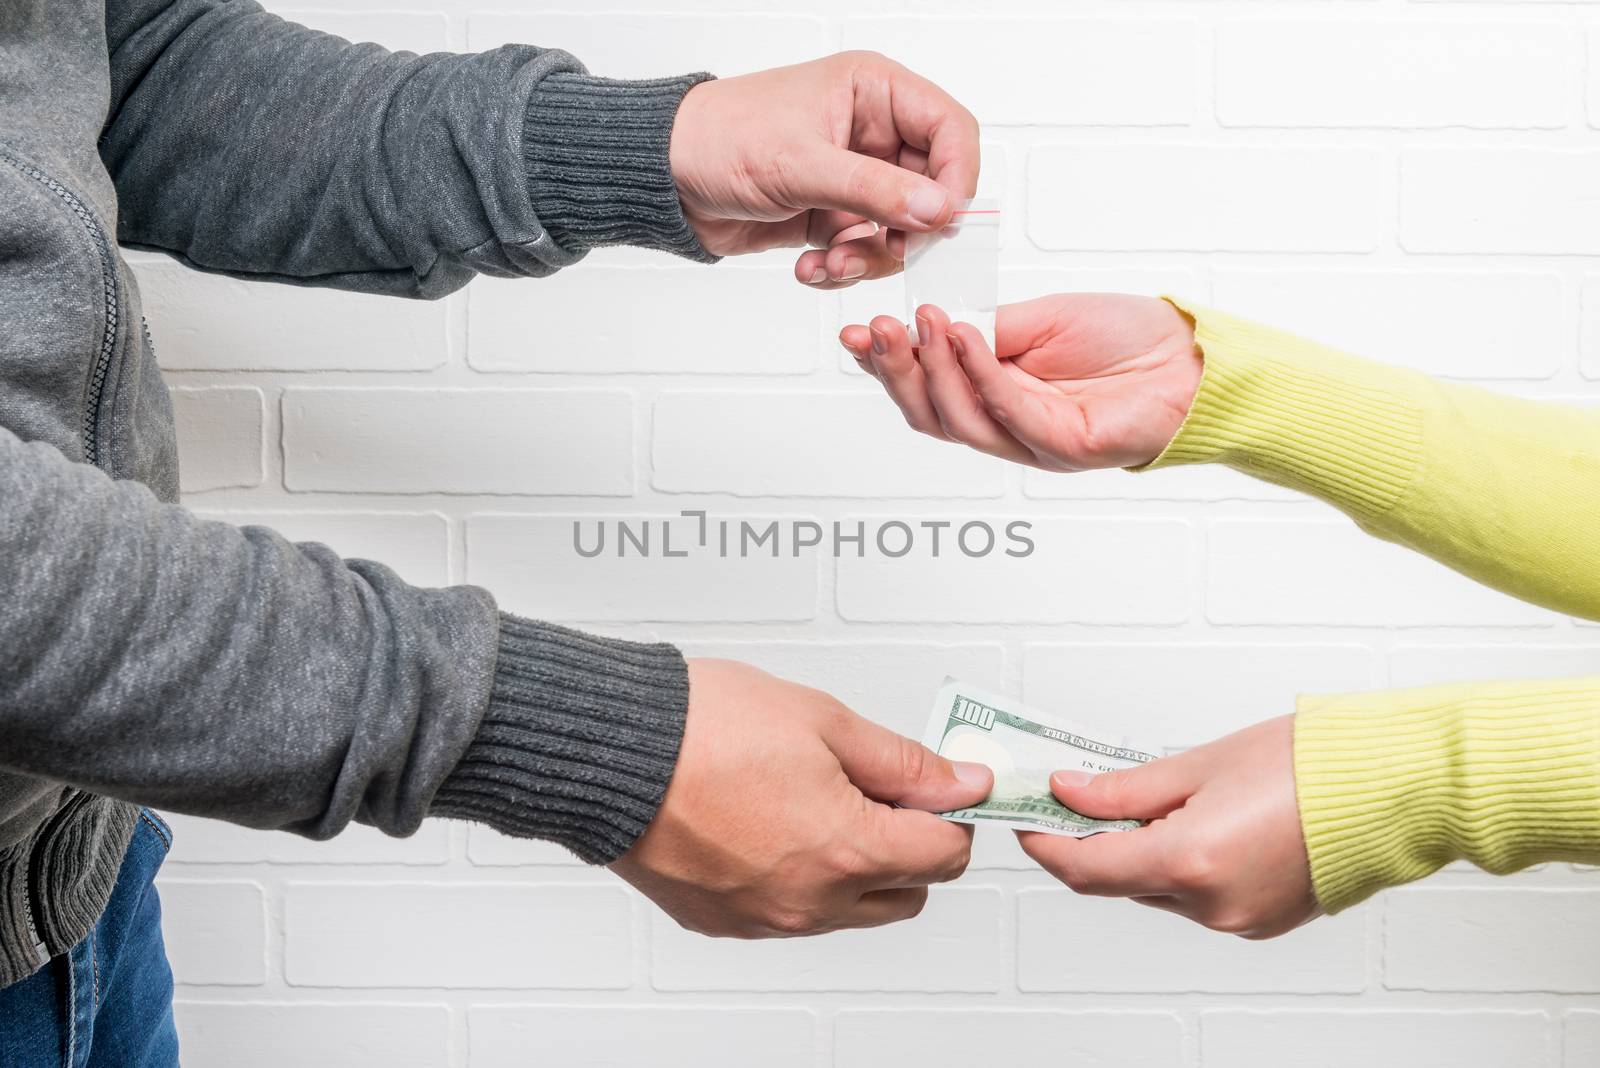 Man sells a woman a dose of drugs against a brick wall background